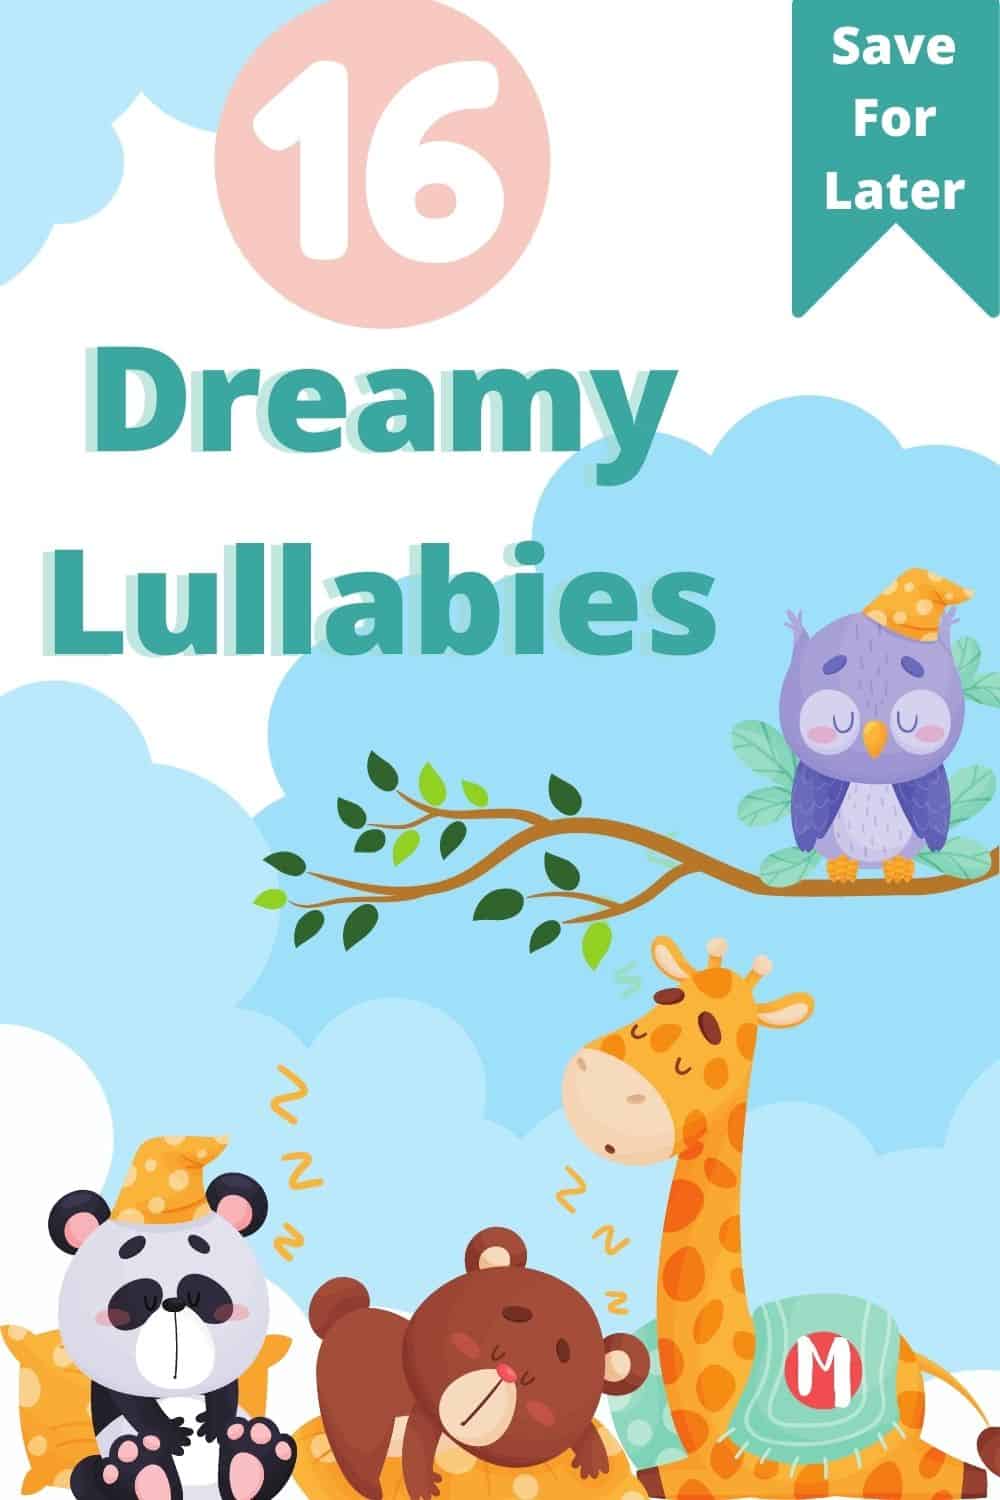 Baby animals in pajamas sleeping in floating clouds. 16 Dreamy lullabies for baby. Save for later